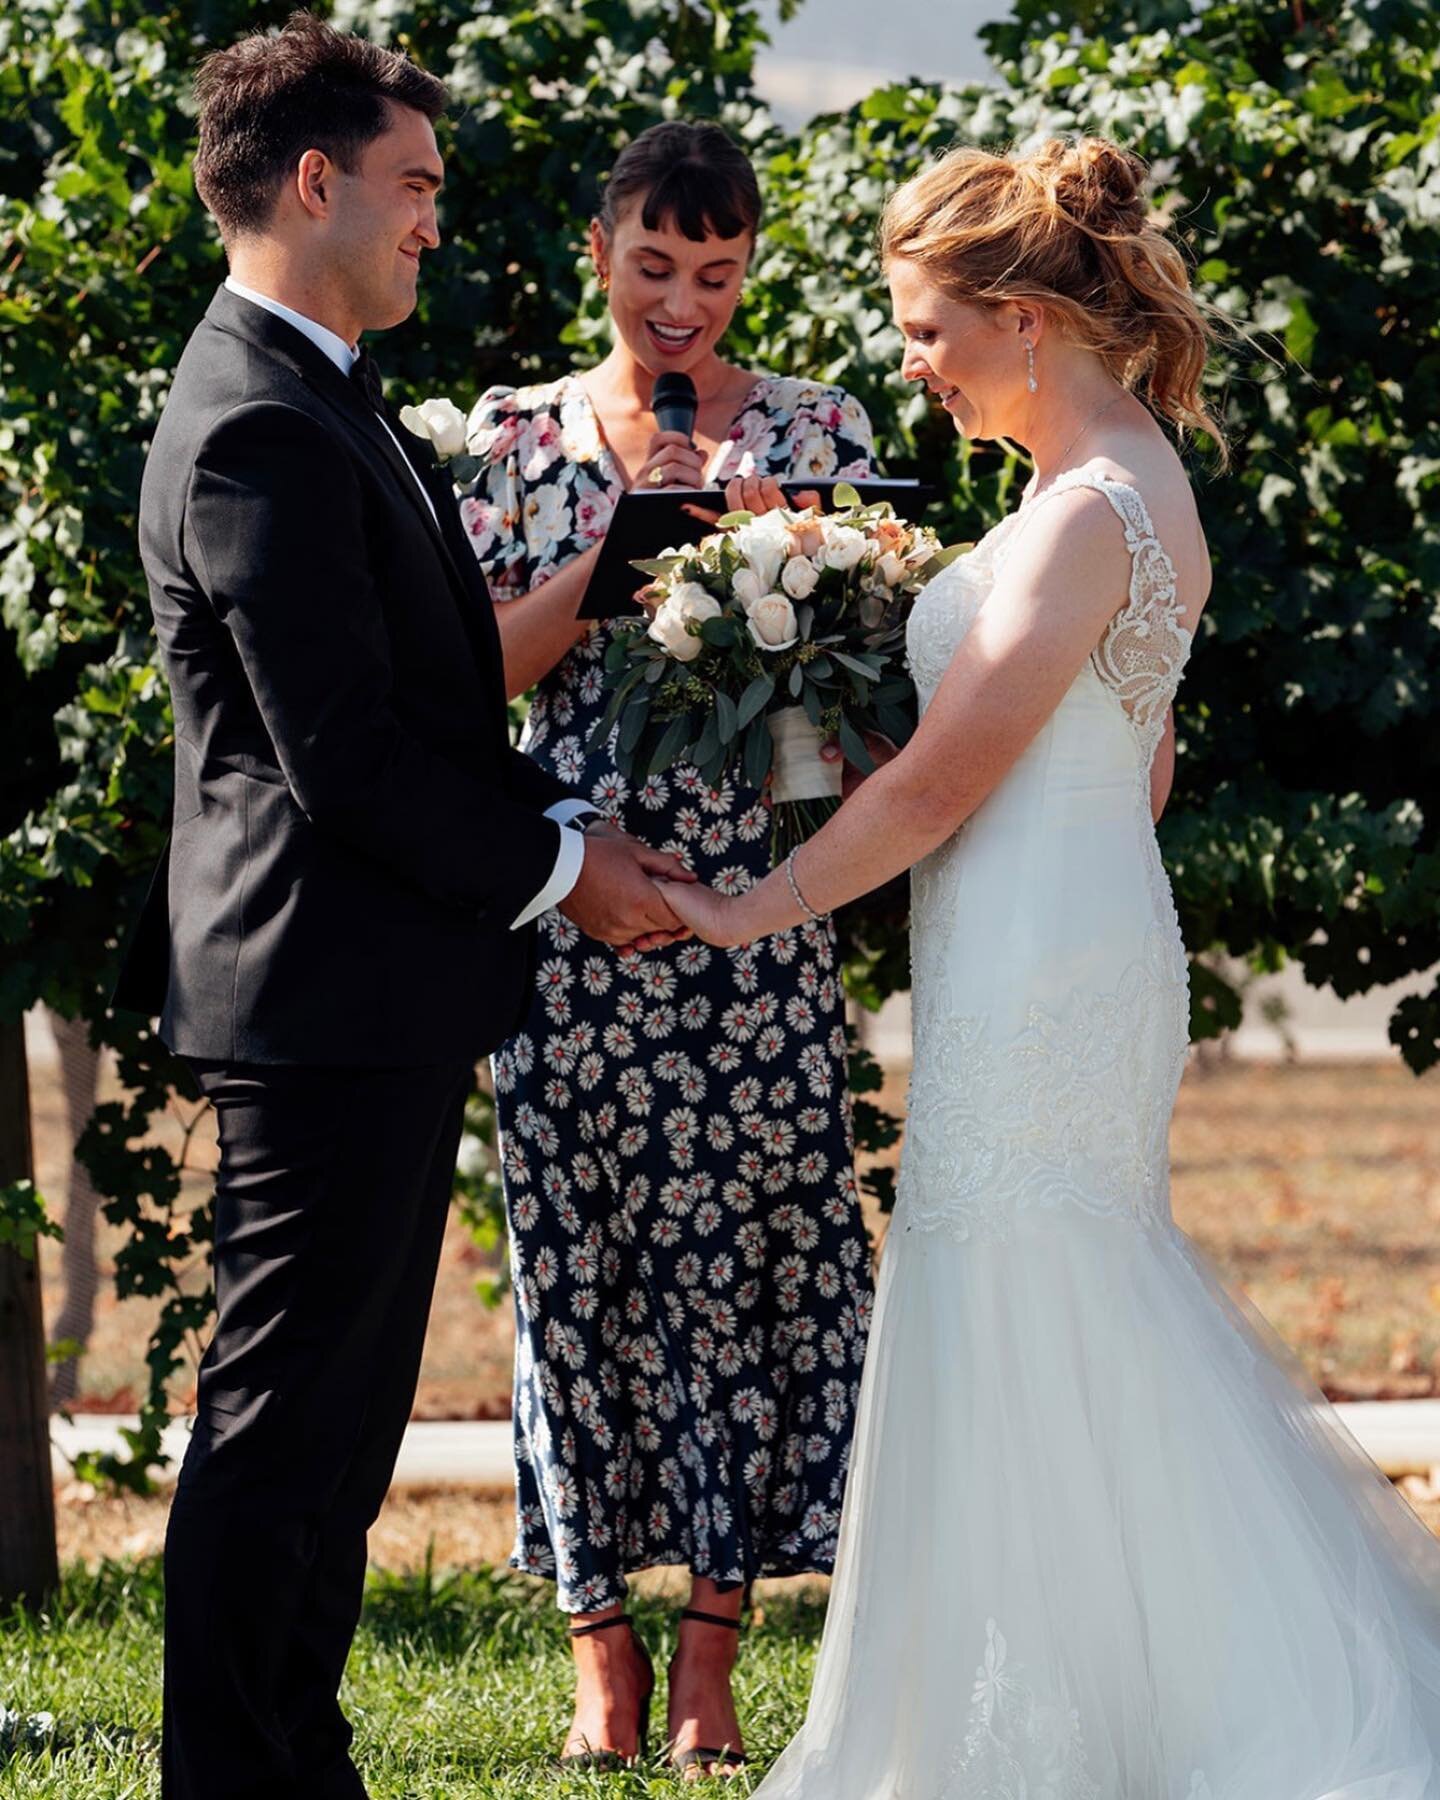 How was this beautiful day a whole year ago?! 

Sending love to all my happily married couples 🤍
.
.
.
Venue @vueonhalcyon 

#civilcelebrant #celebrant #morningtonpeninsula #melbourne #weddings #love #loveislove #equalmarriage #equality #yay #marria